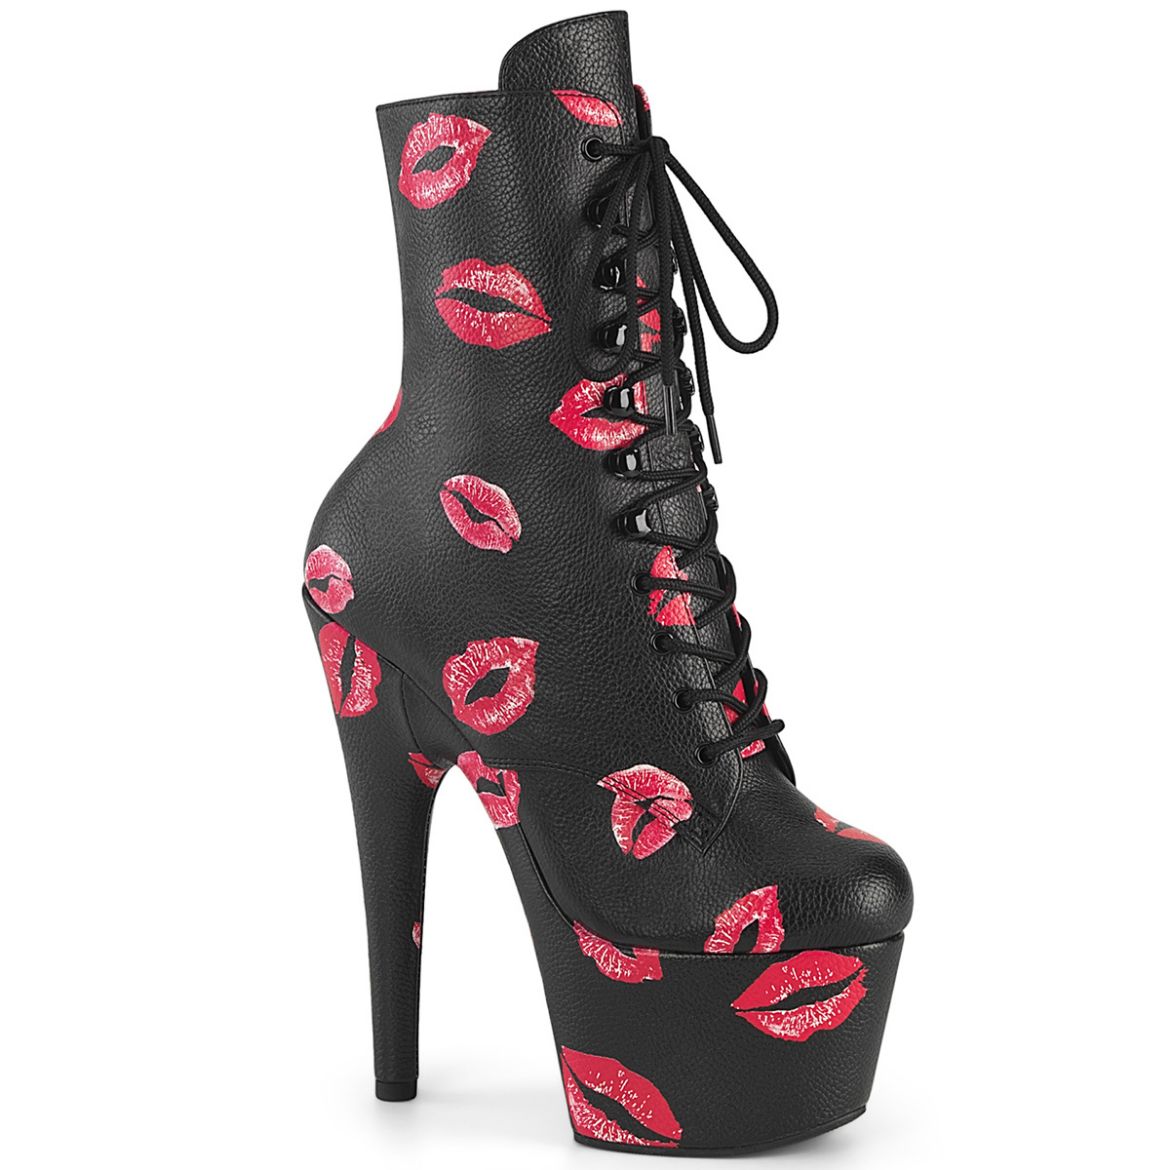 Product image of Pleaser ADORE-1020KISSES Blk Faux Leather/Blk Faux Leather 7 Inch Heel 2 3/4 Inch PF Lace-Up Lips Print Ankle Boot Side Zip